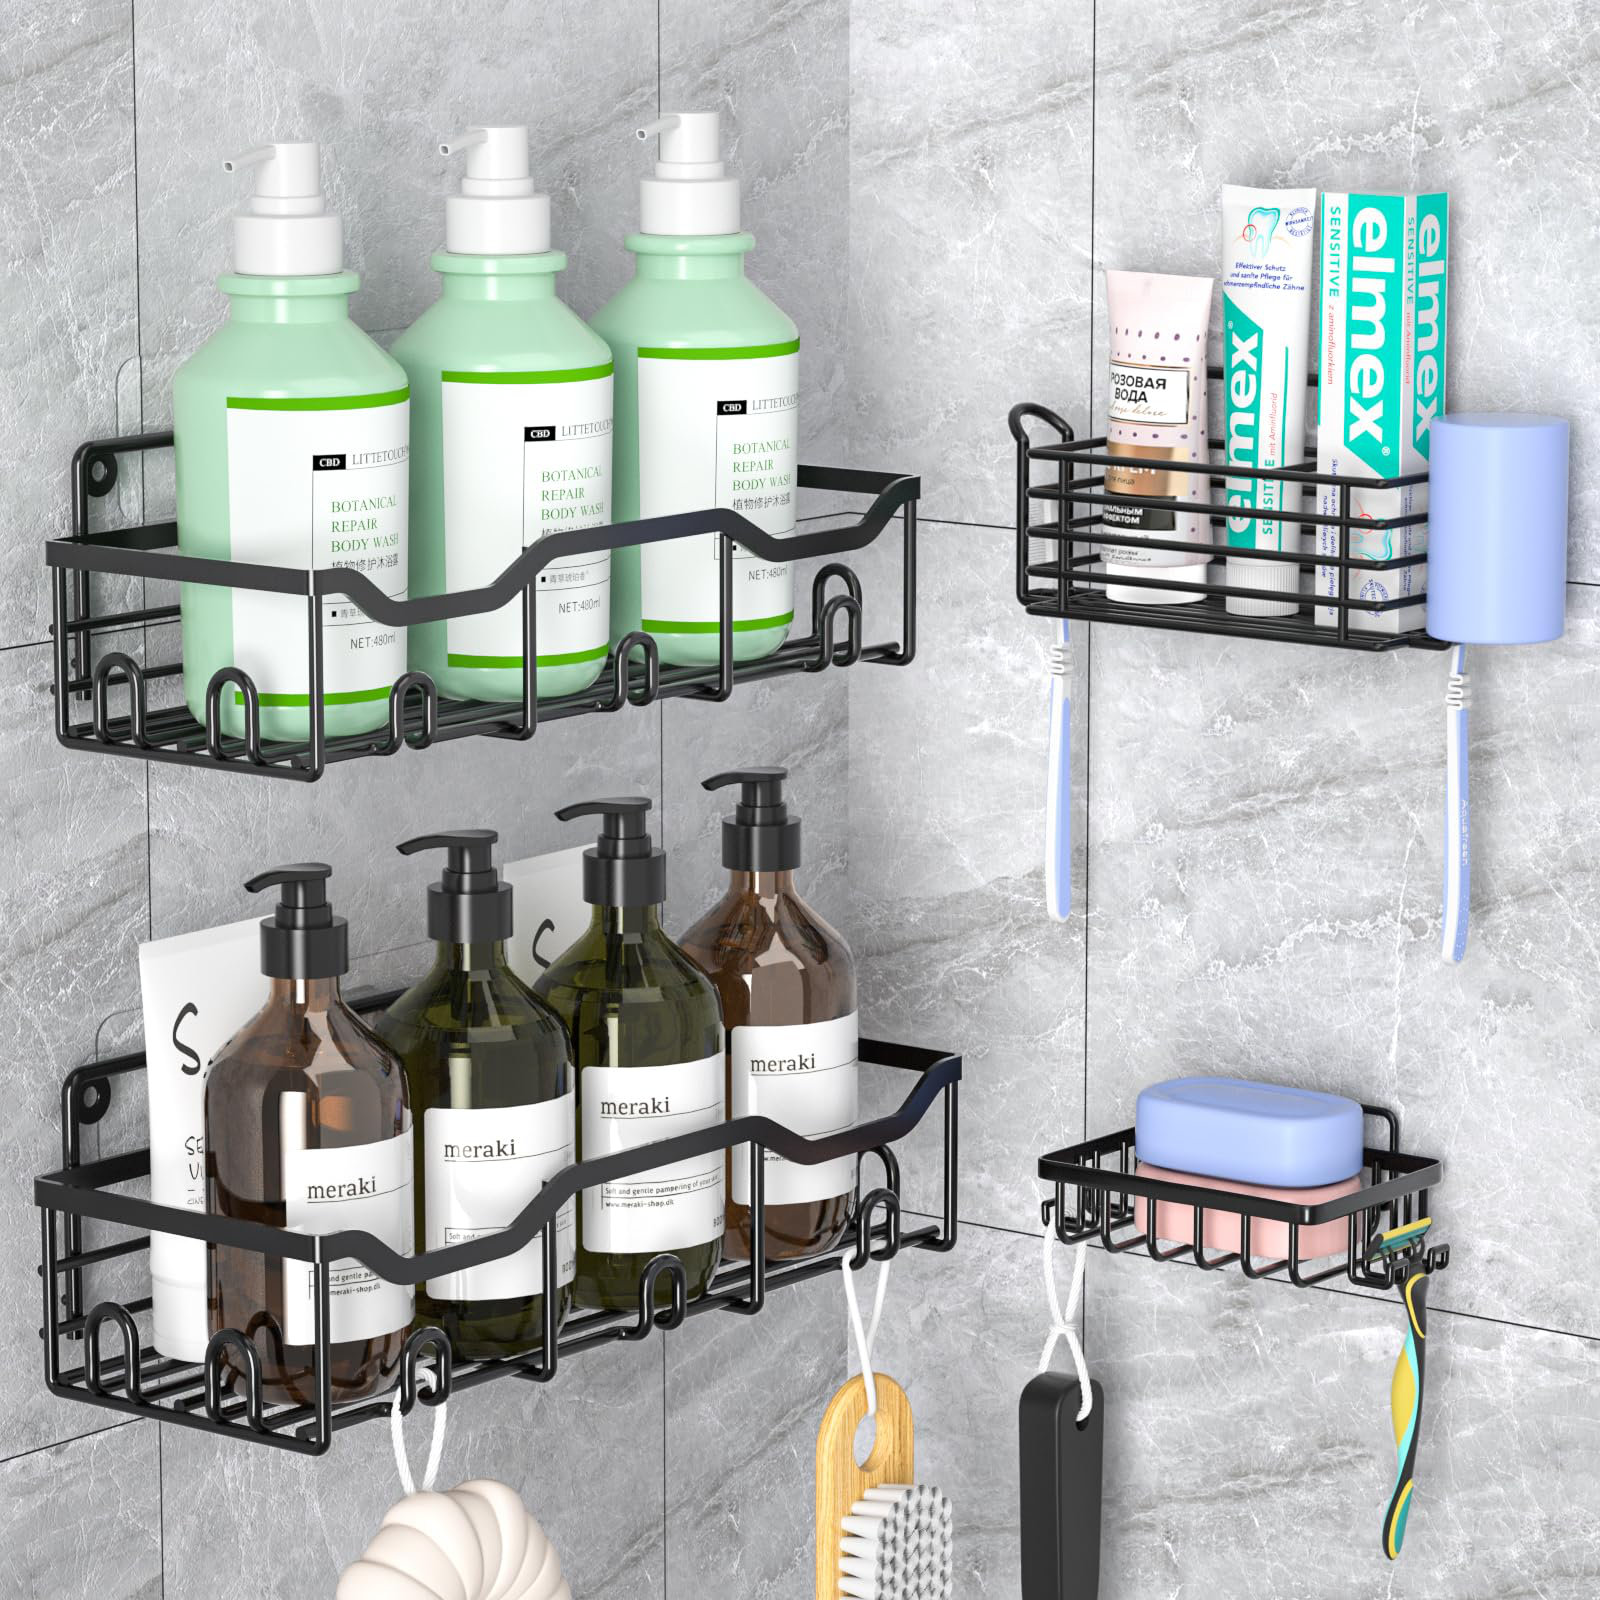 Rebrilliant + Callula Adhesive Mount Stainless Steel Shower Caddy